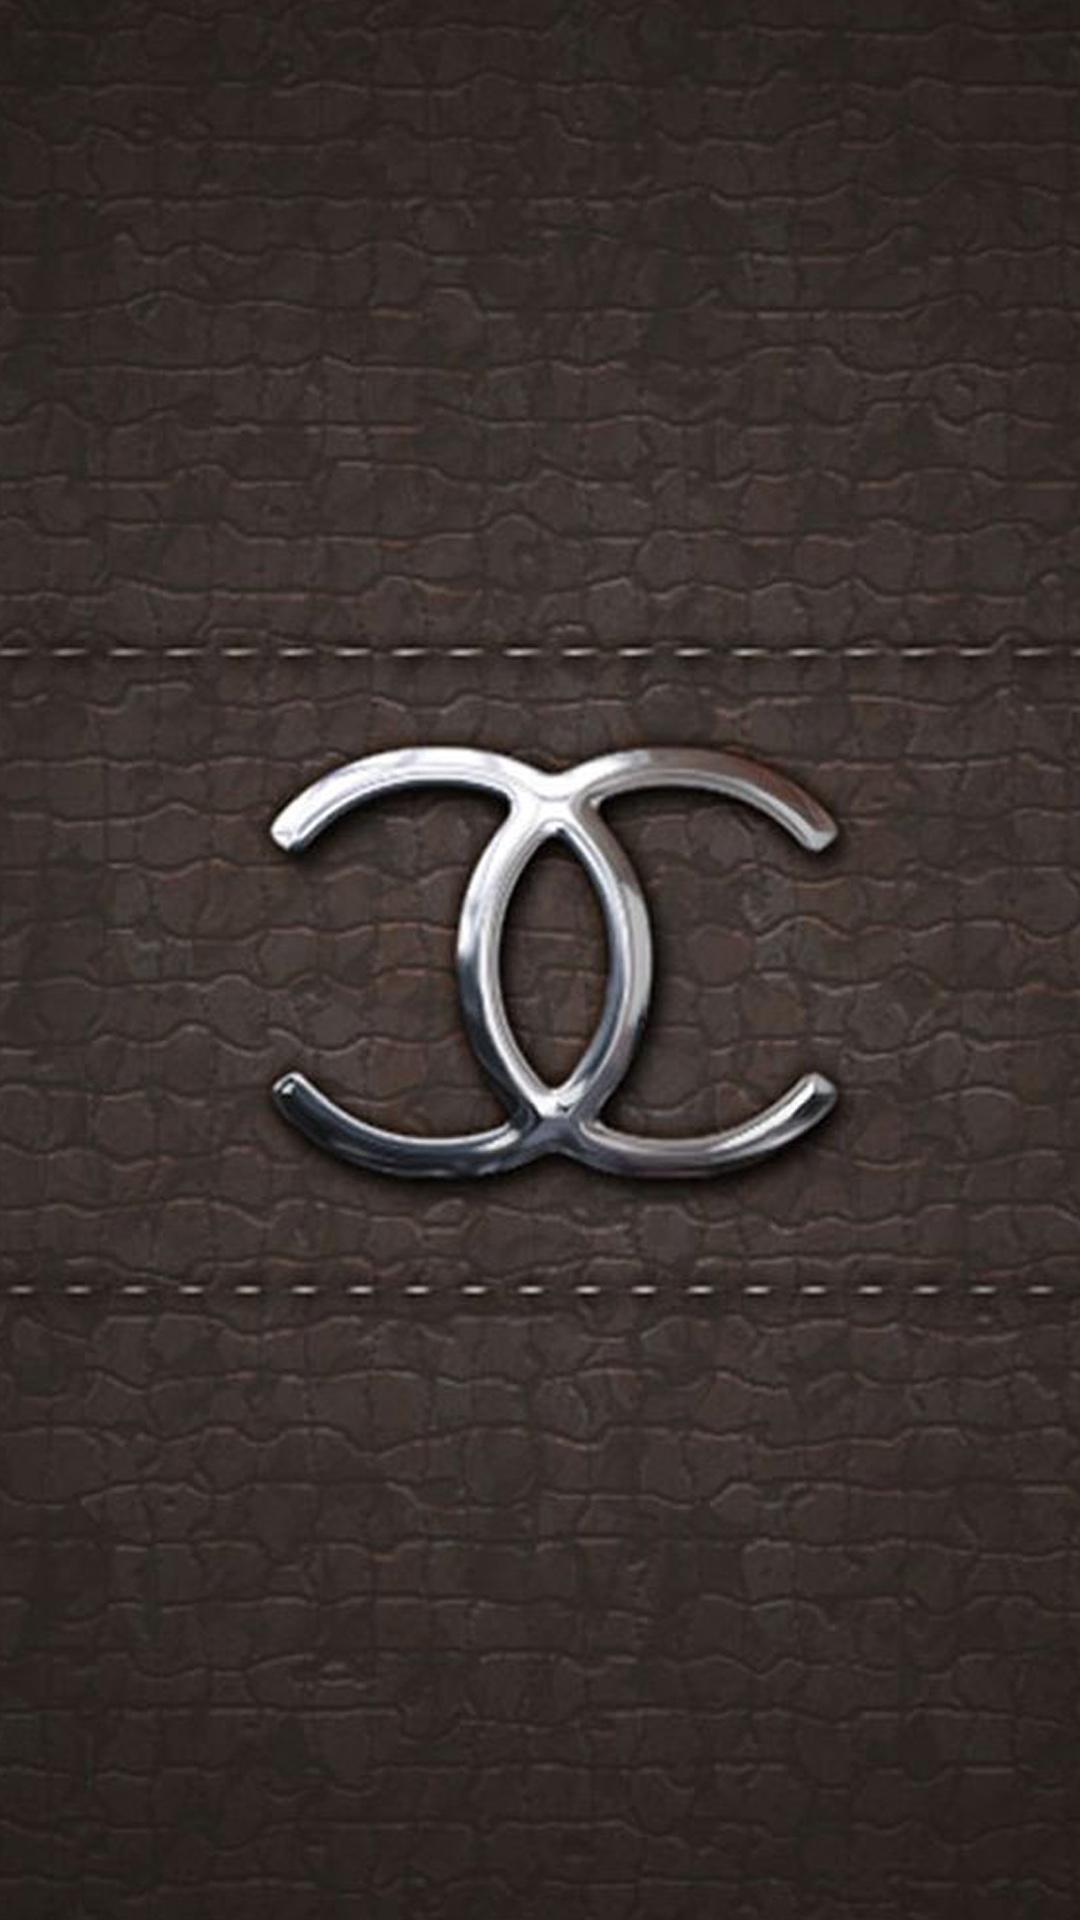 CHANEL (Chanel). IPhone X wallpaper brands